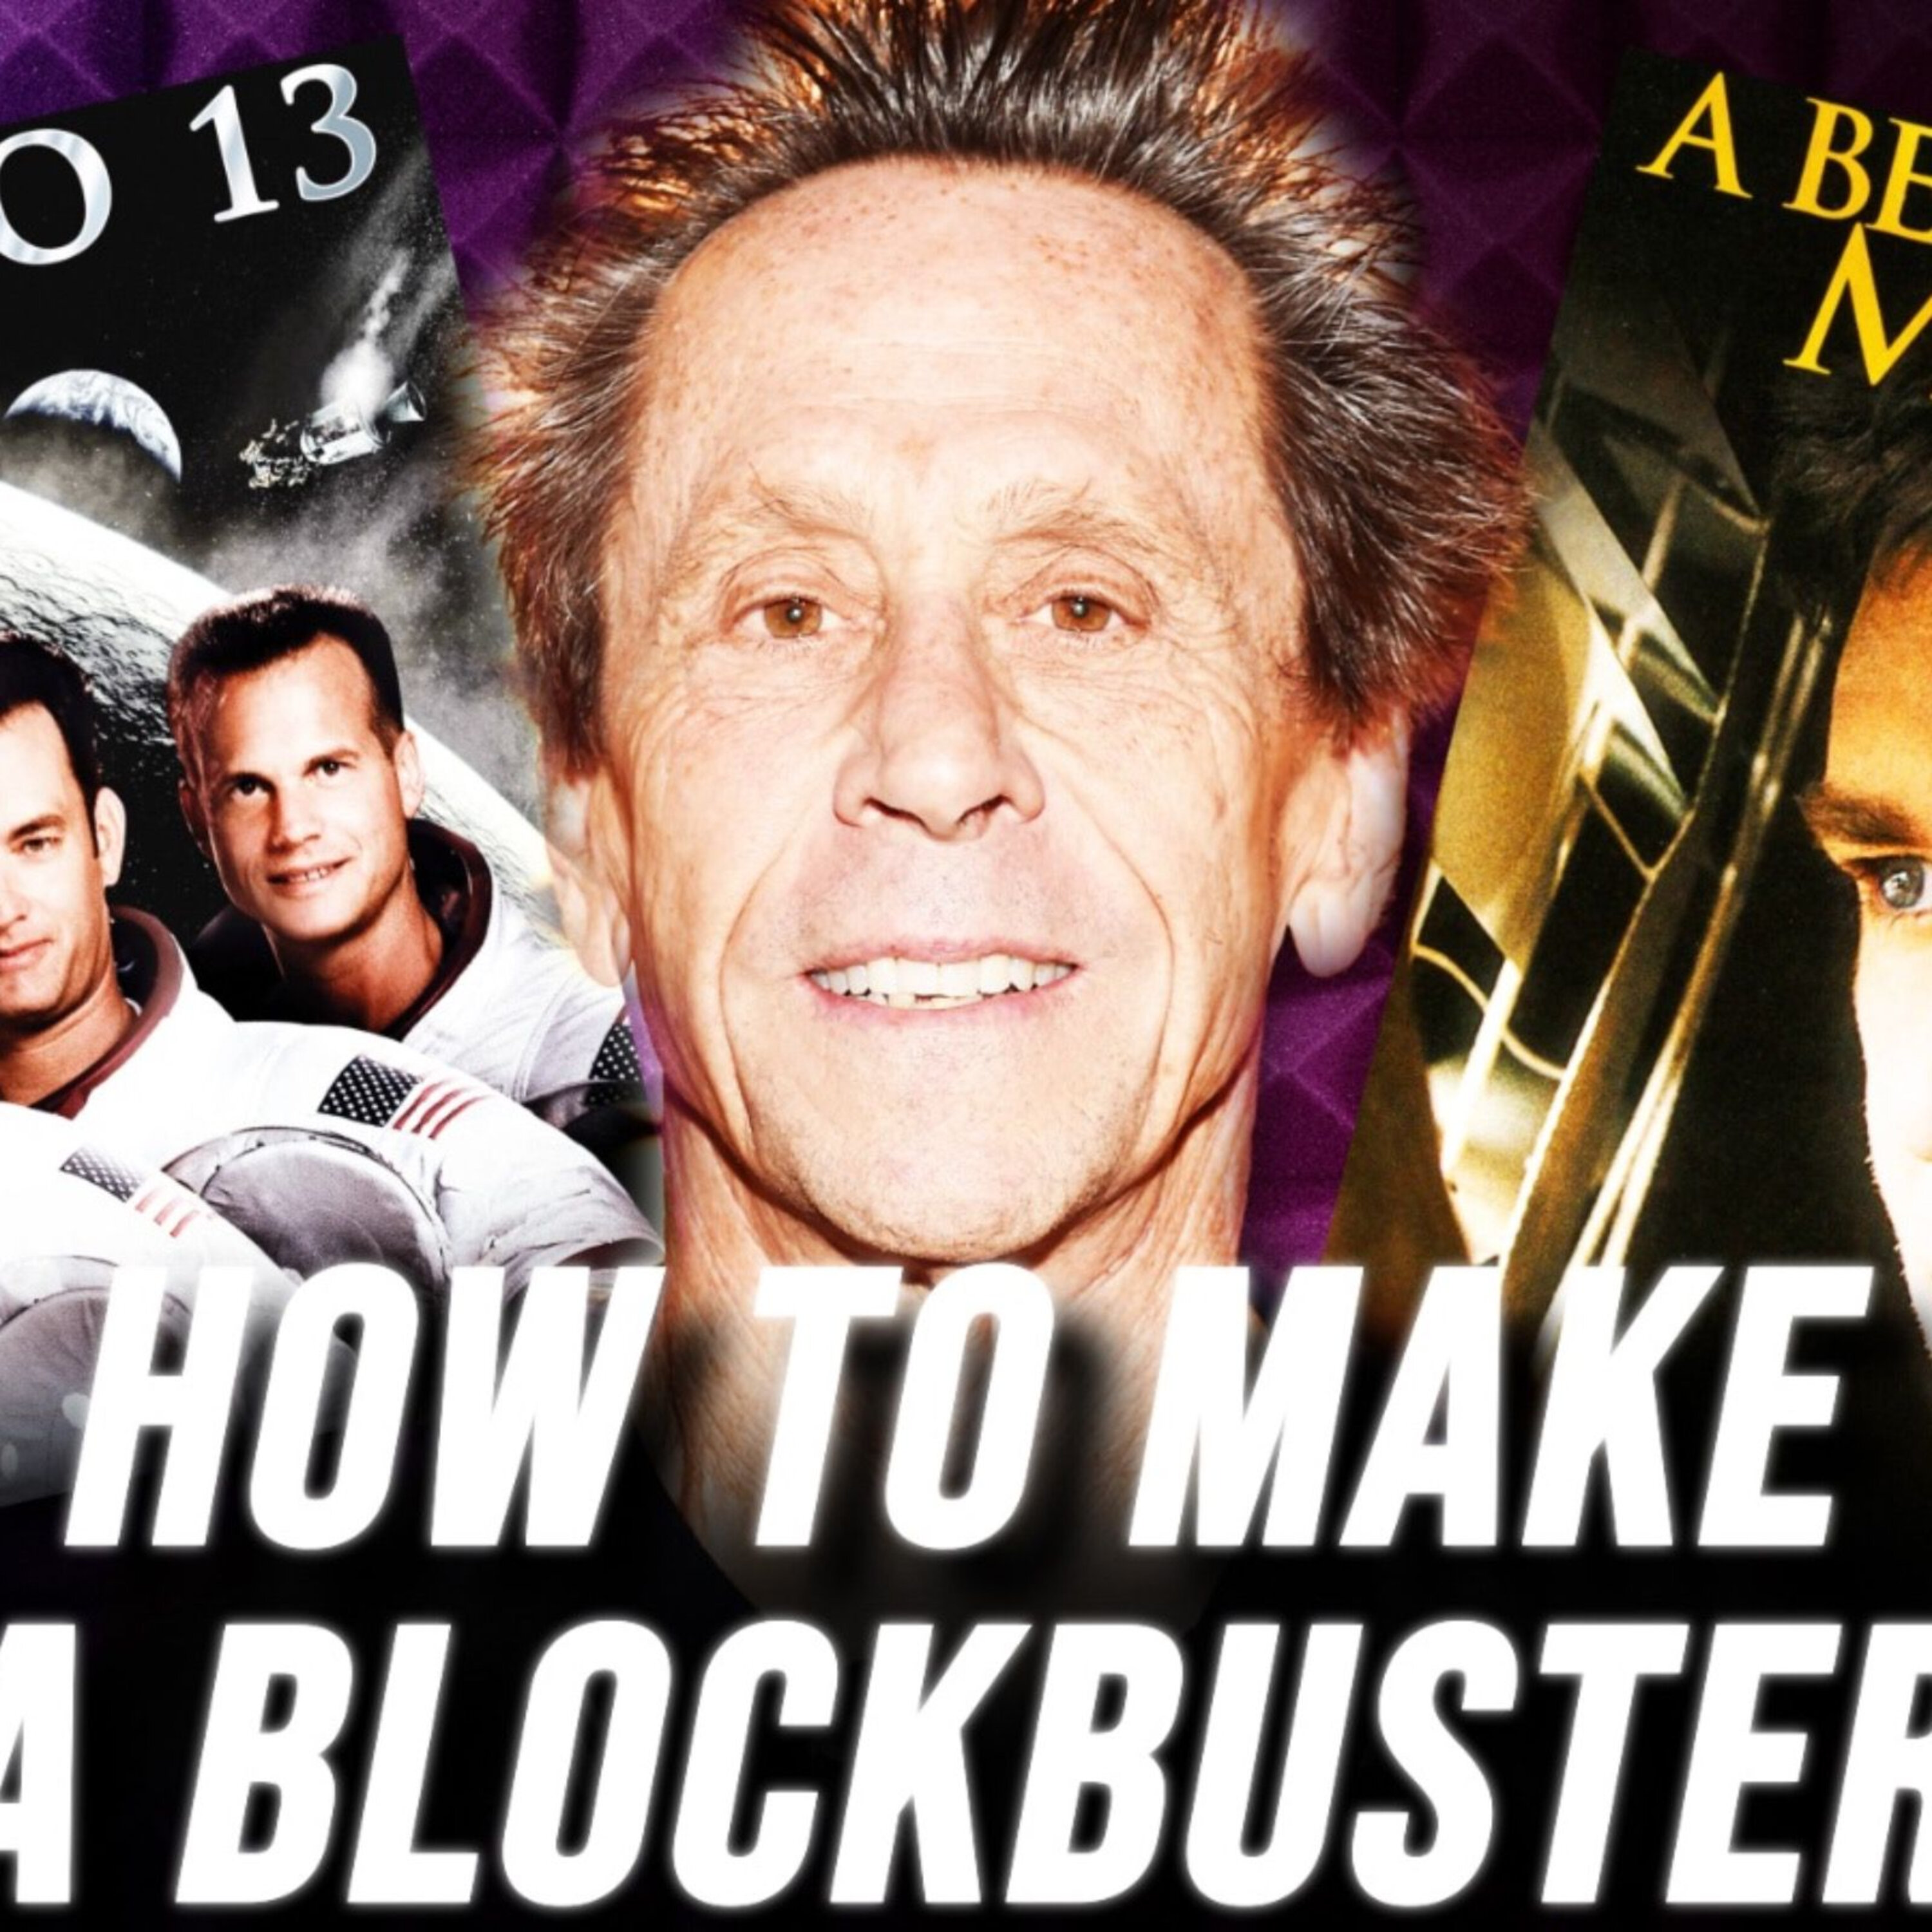 EP 29: Hollywood mega-producer Brian Grazer on making movies and why Tom Hanks needs to be saved